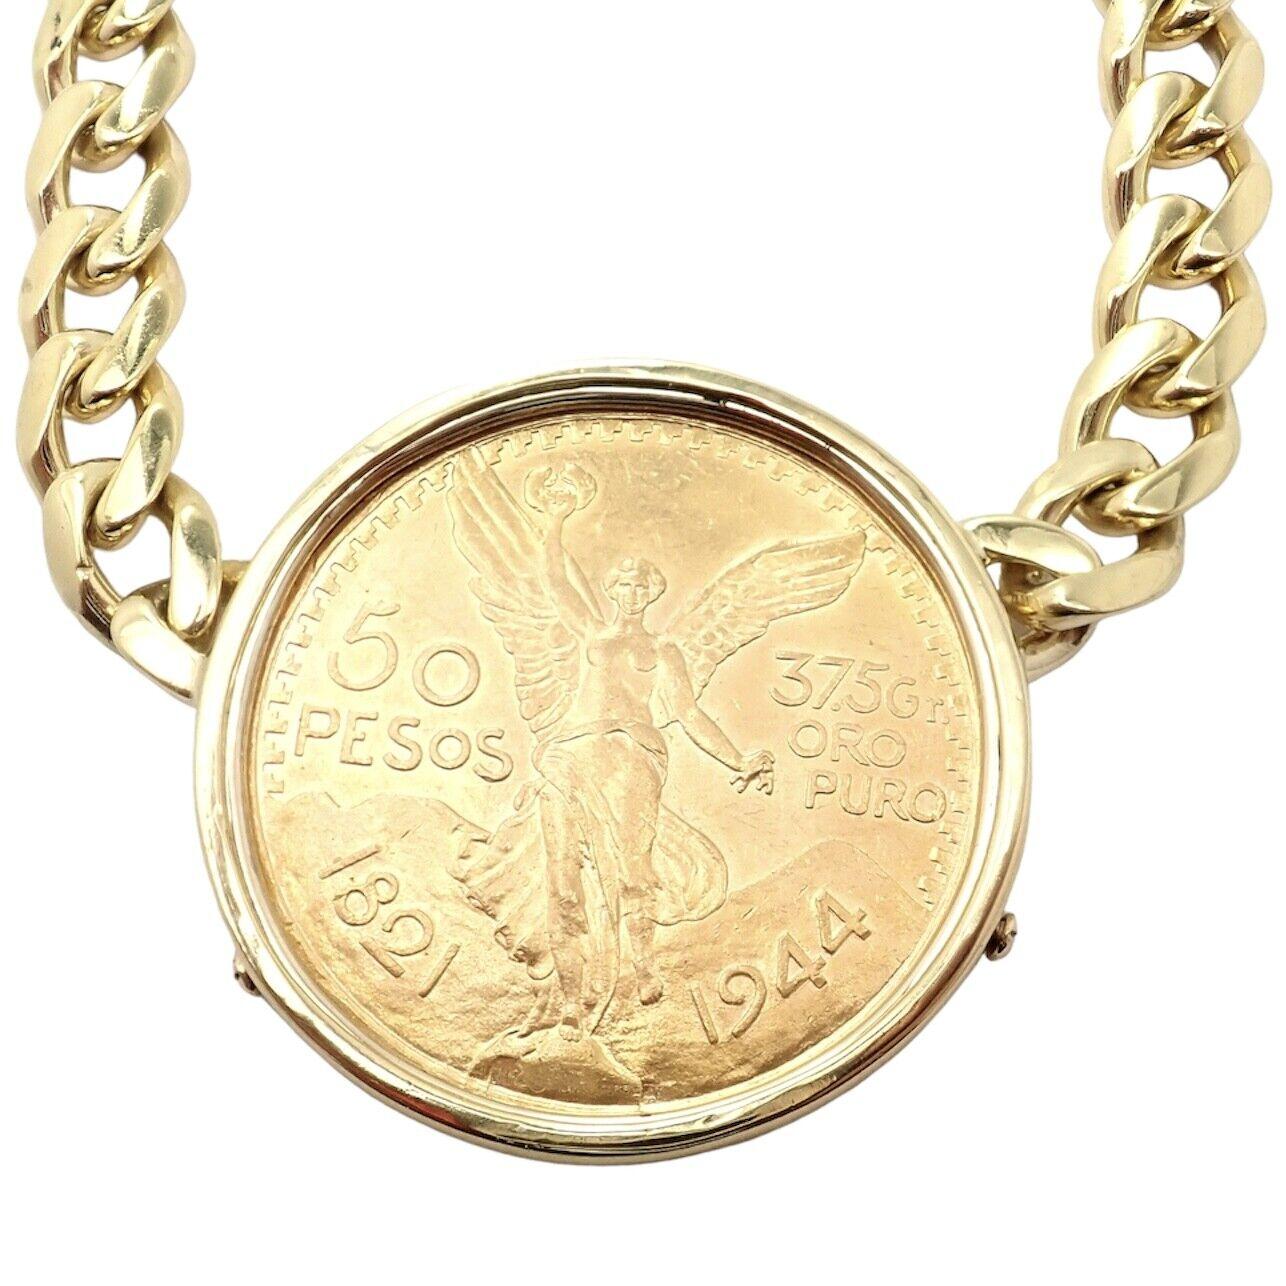 Bulgari 18k yellow gold with 22k Gold Centenario 50 Pesos Coin pendant link chain necklace.
Details:
Metal: Chain: 18k Yellow Gold
Coin: 1.205 troy ounces of gold (the entire weight of the coin is 1.33 ounces) Roughly +90% Pure Gold
Measurements: